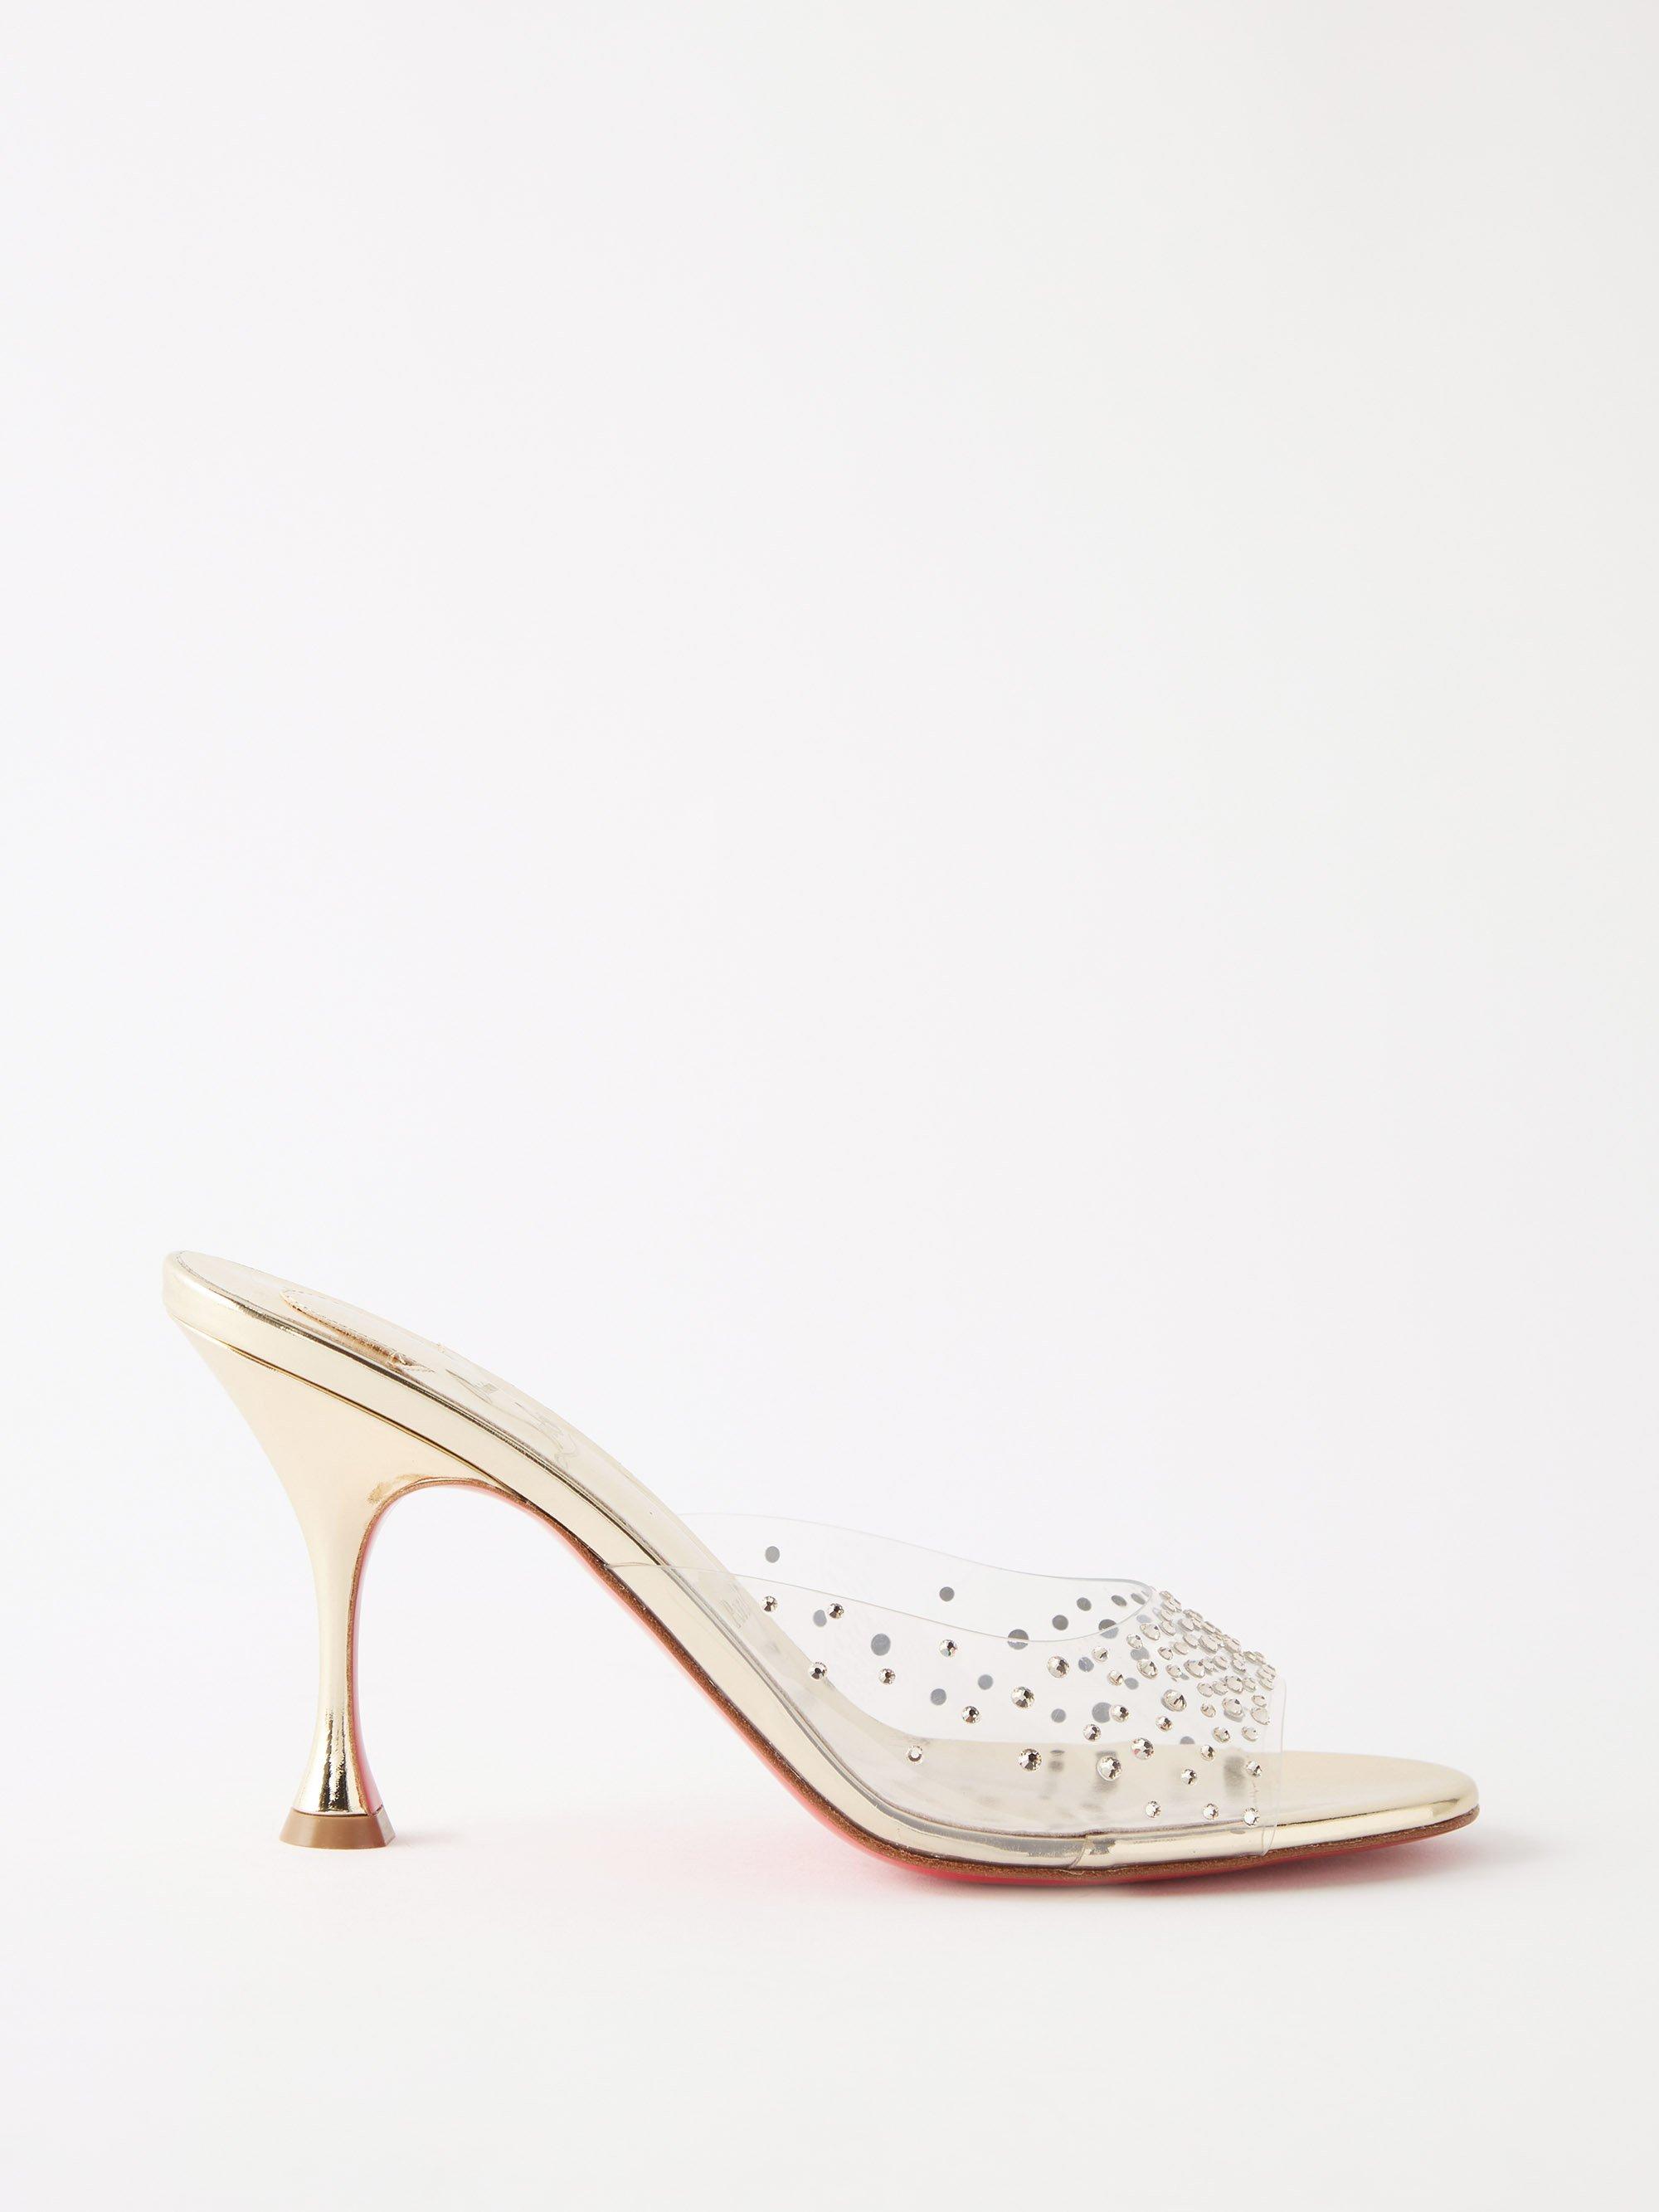 Christian Louboutin Degramule 85 Pvc And Leather Mules in Natural | Lyst